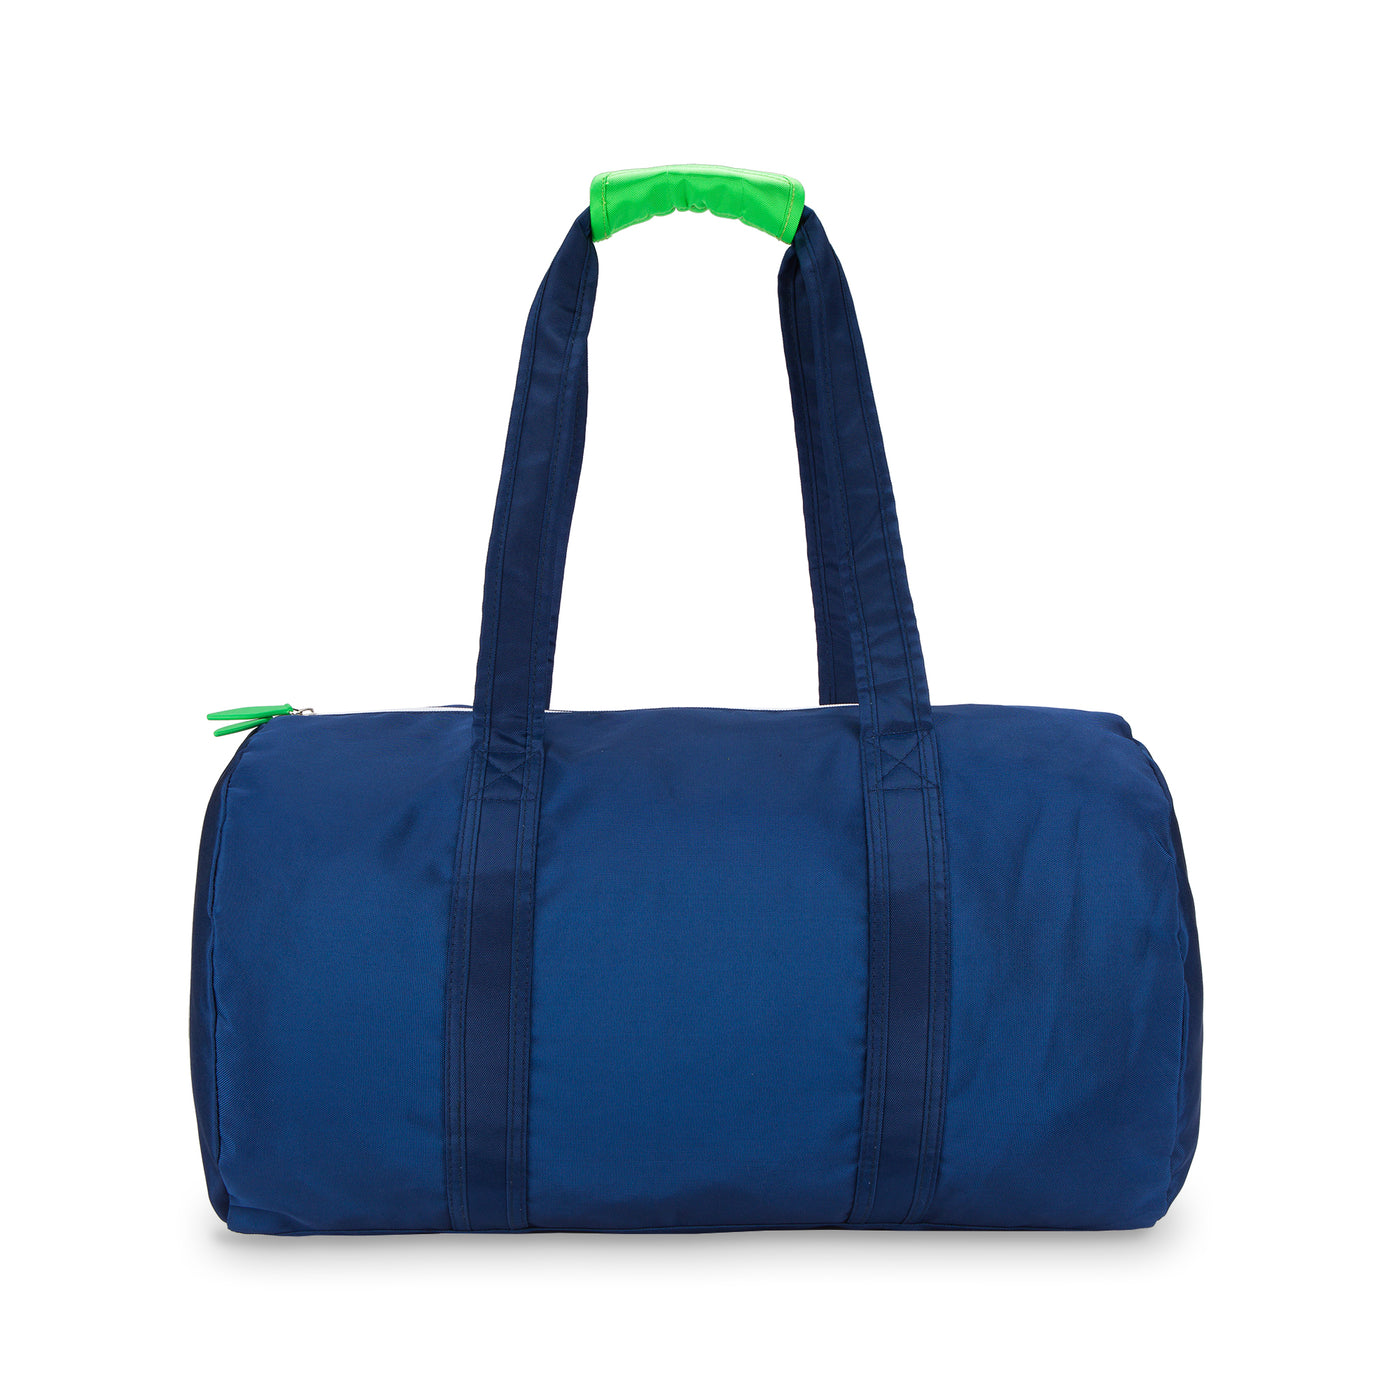 navy nylon duffel with lime green cap on straps